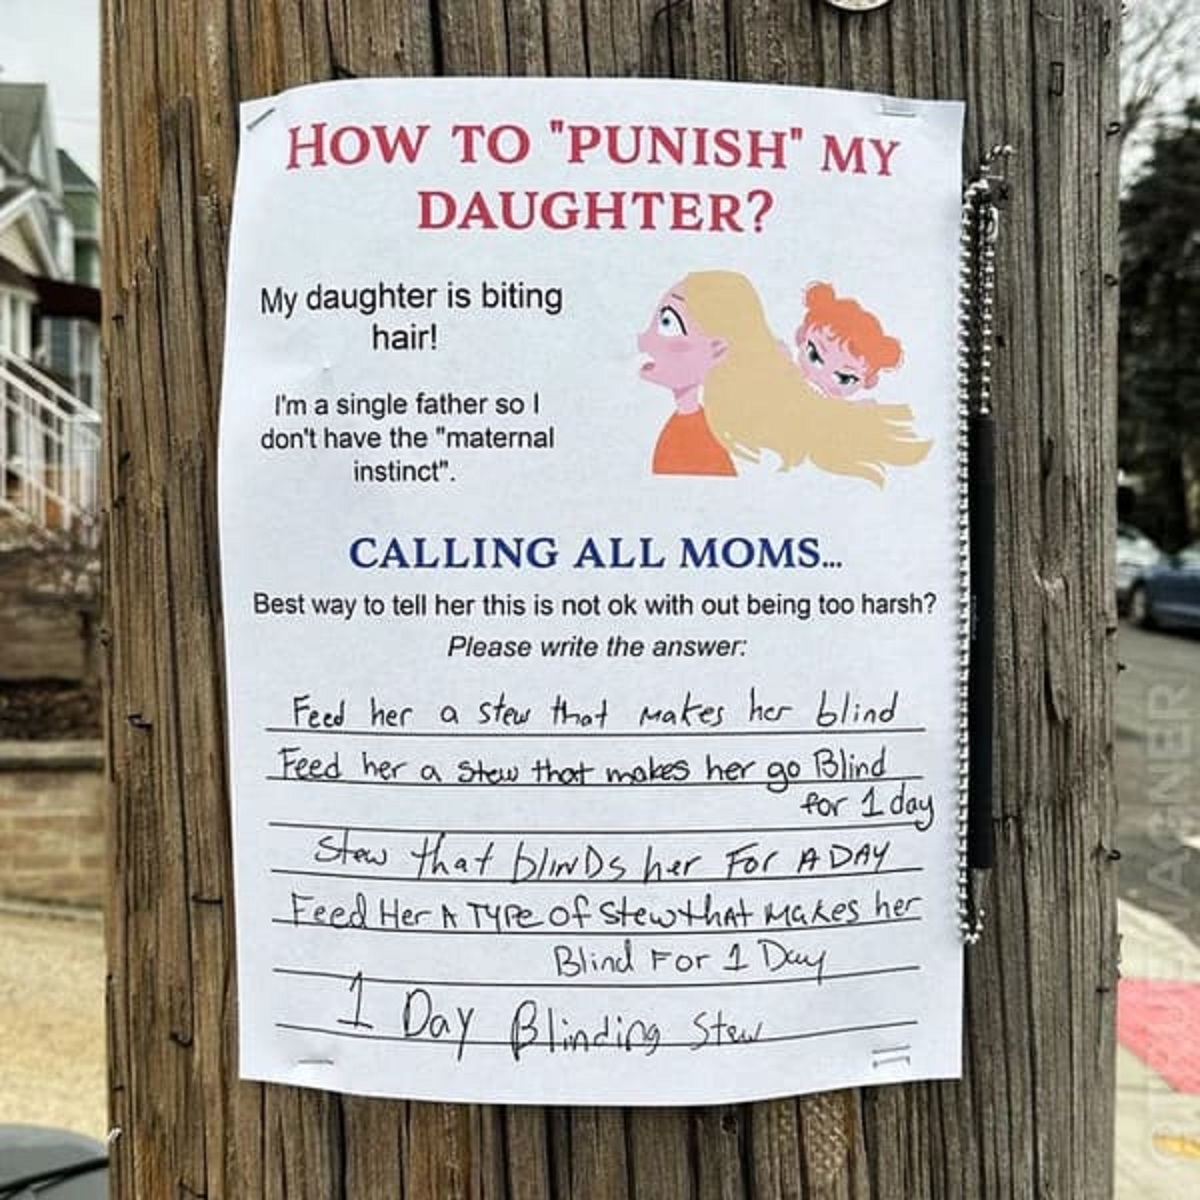 sign - How To "Punish" My Daughter? My daughter is biting hair! I'm a single father so l don't have the "maternal instinct". Calling All Moms... Best way to tell her this is not ok with out being too harsh? Please write the answer Feed her a stew that mak